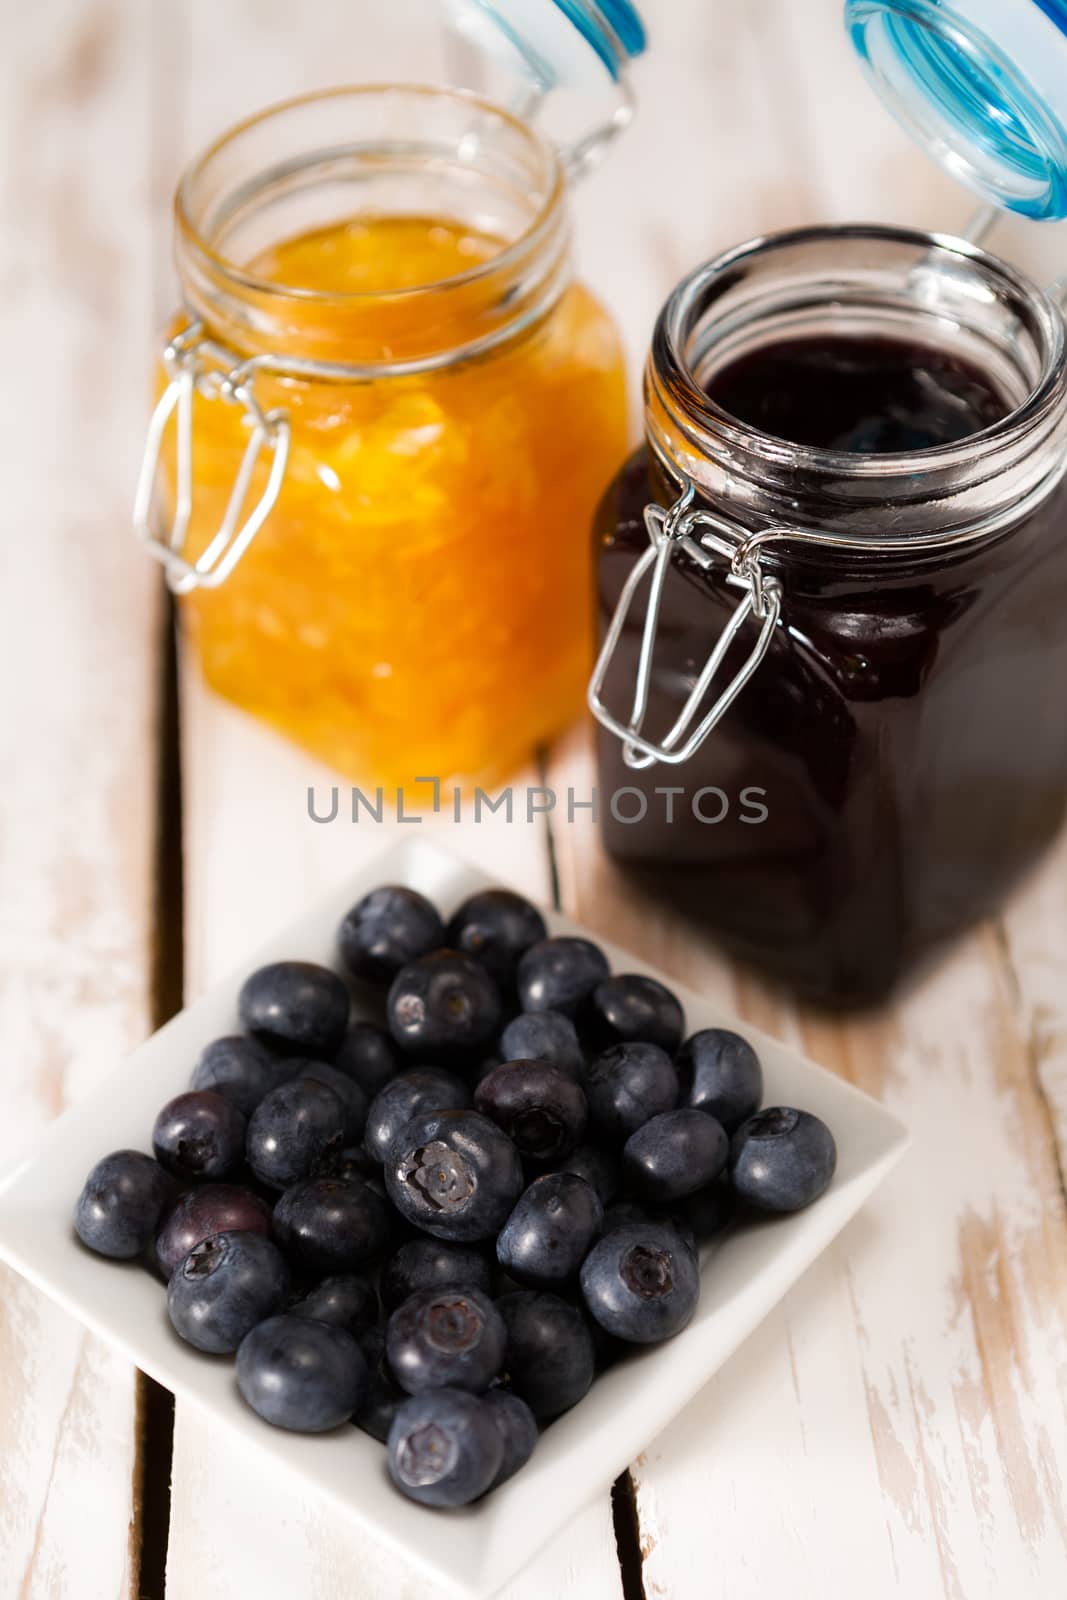 Blueberries over a wooden table by LuigiMorbidelli